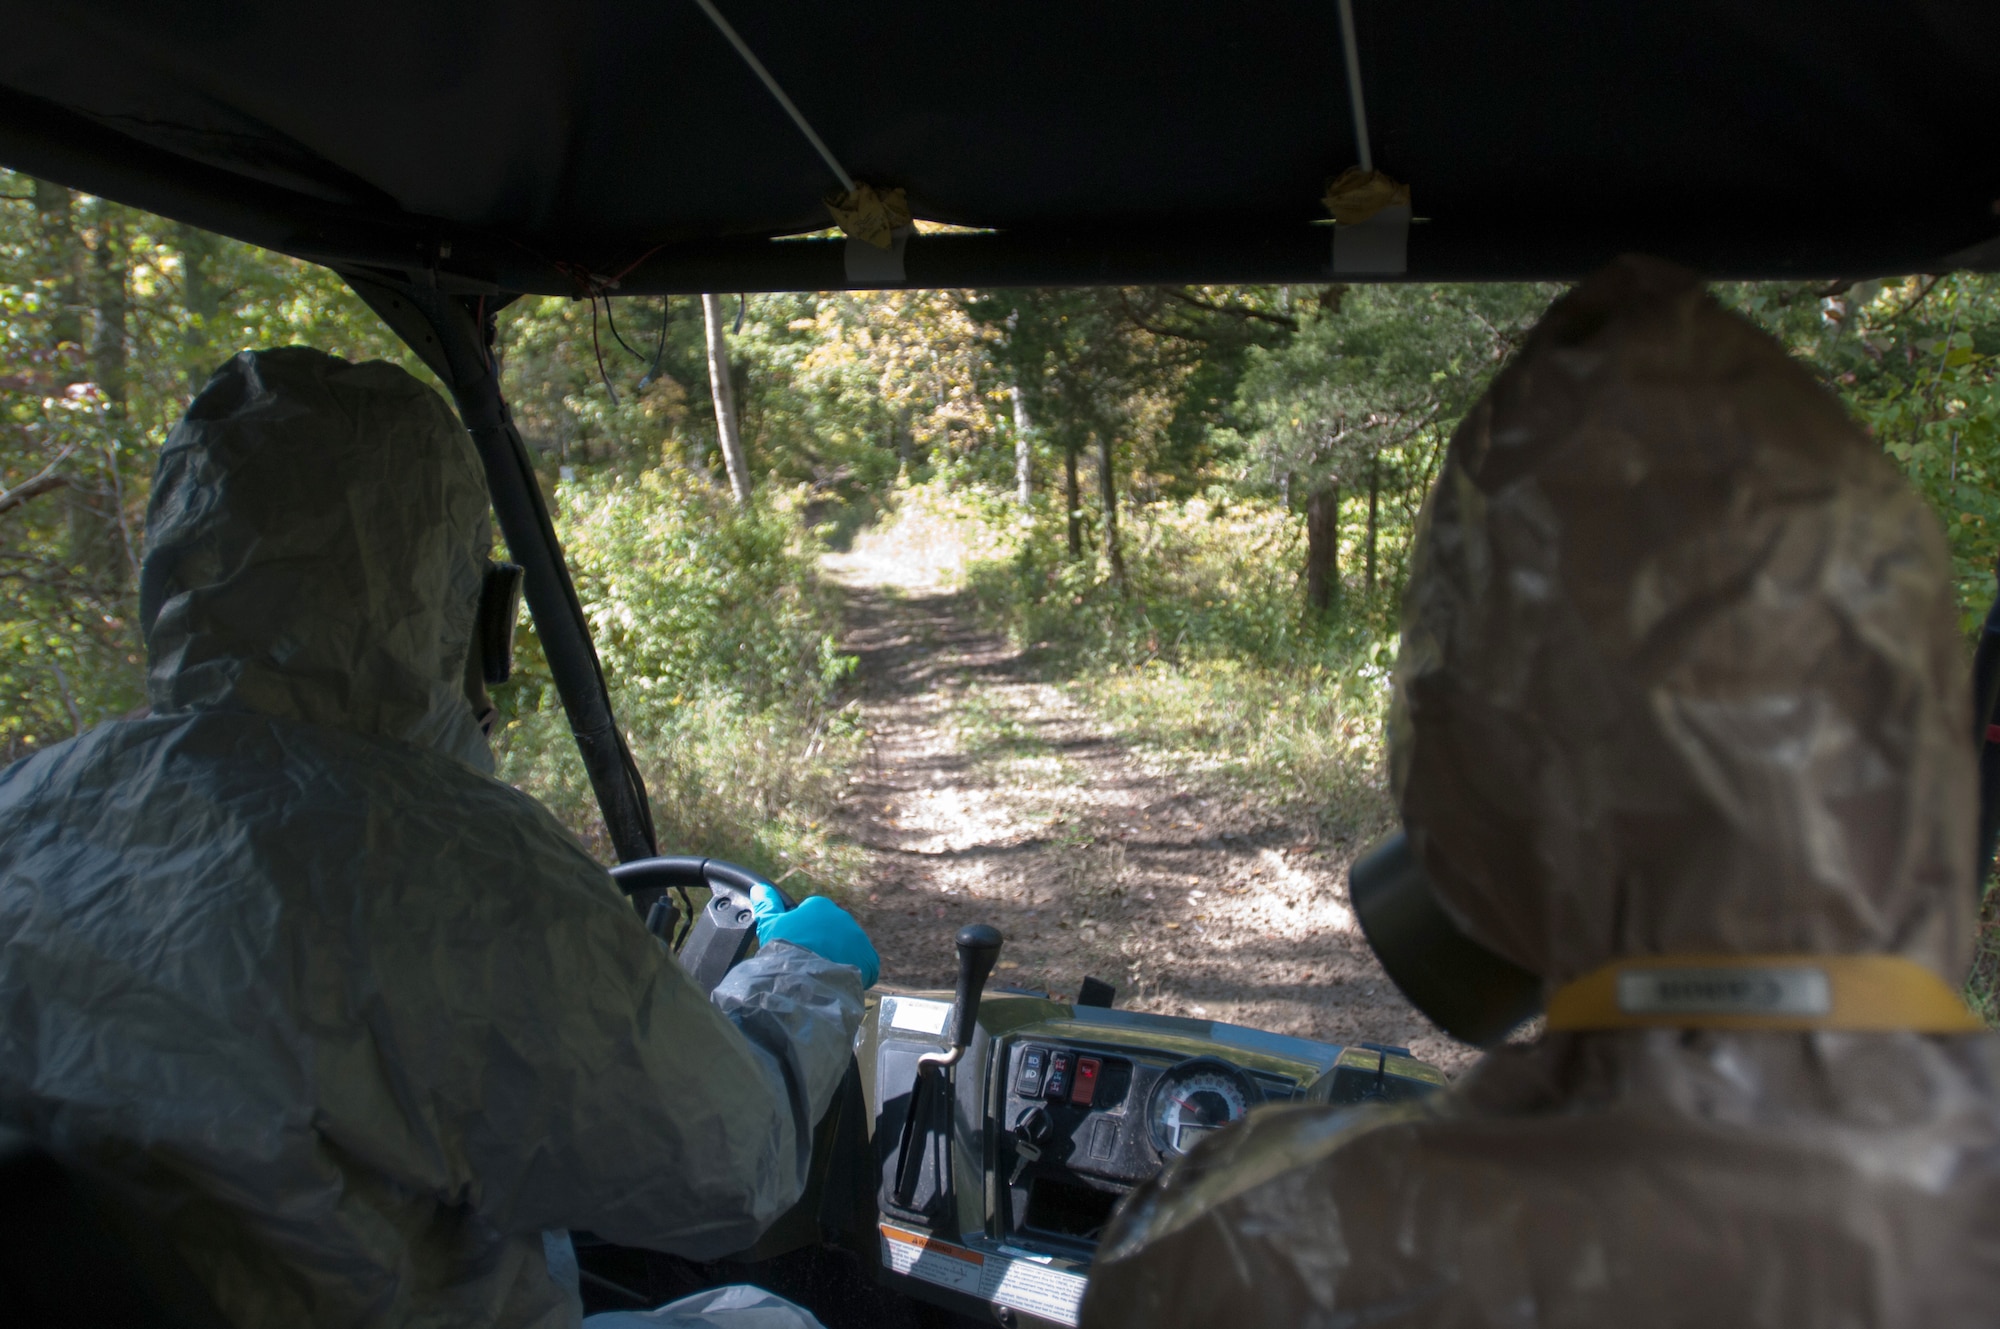 Members of the Kentucky National Guard's 41st Civil Support Team drive through the woods to a cabin where suspected bomb making substances are present during a U.S. Army North exercise on Oct. 2, 2012, in Frankfort, Ky. (Kentucky Air National Guard photo by Master Sgt. Phil Speck)